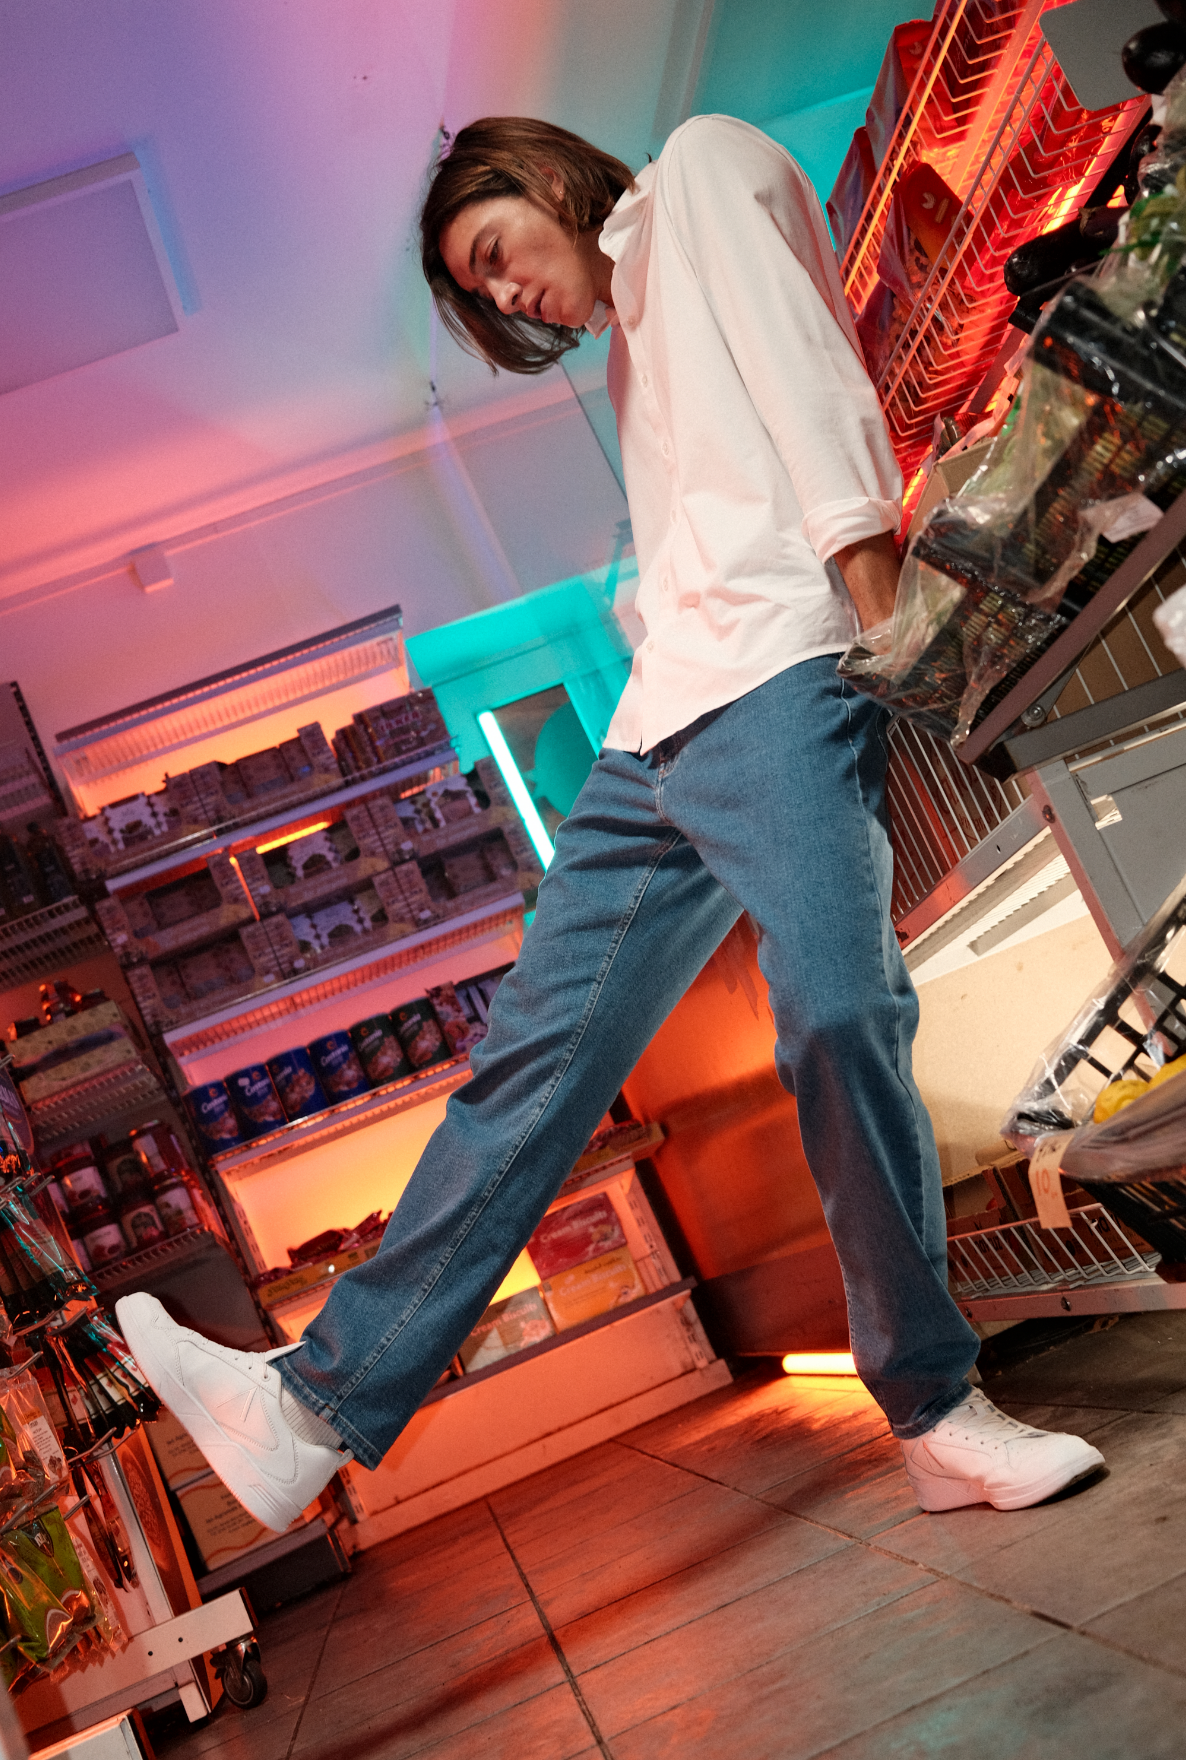 Male model wearing light blue jeans, white shirt, white sneakers lifting one leg up showing stretch of jeans